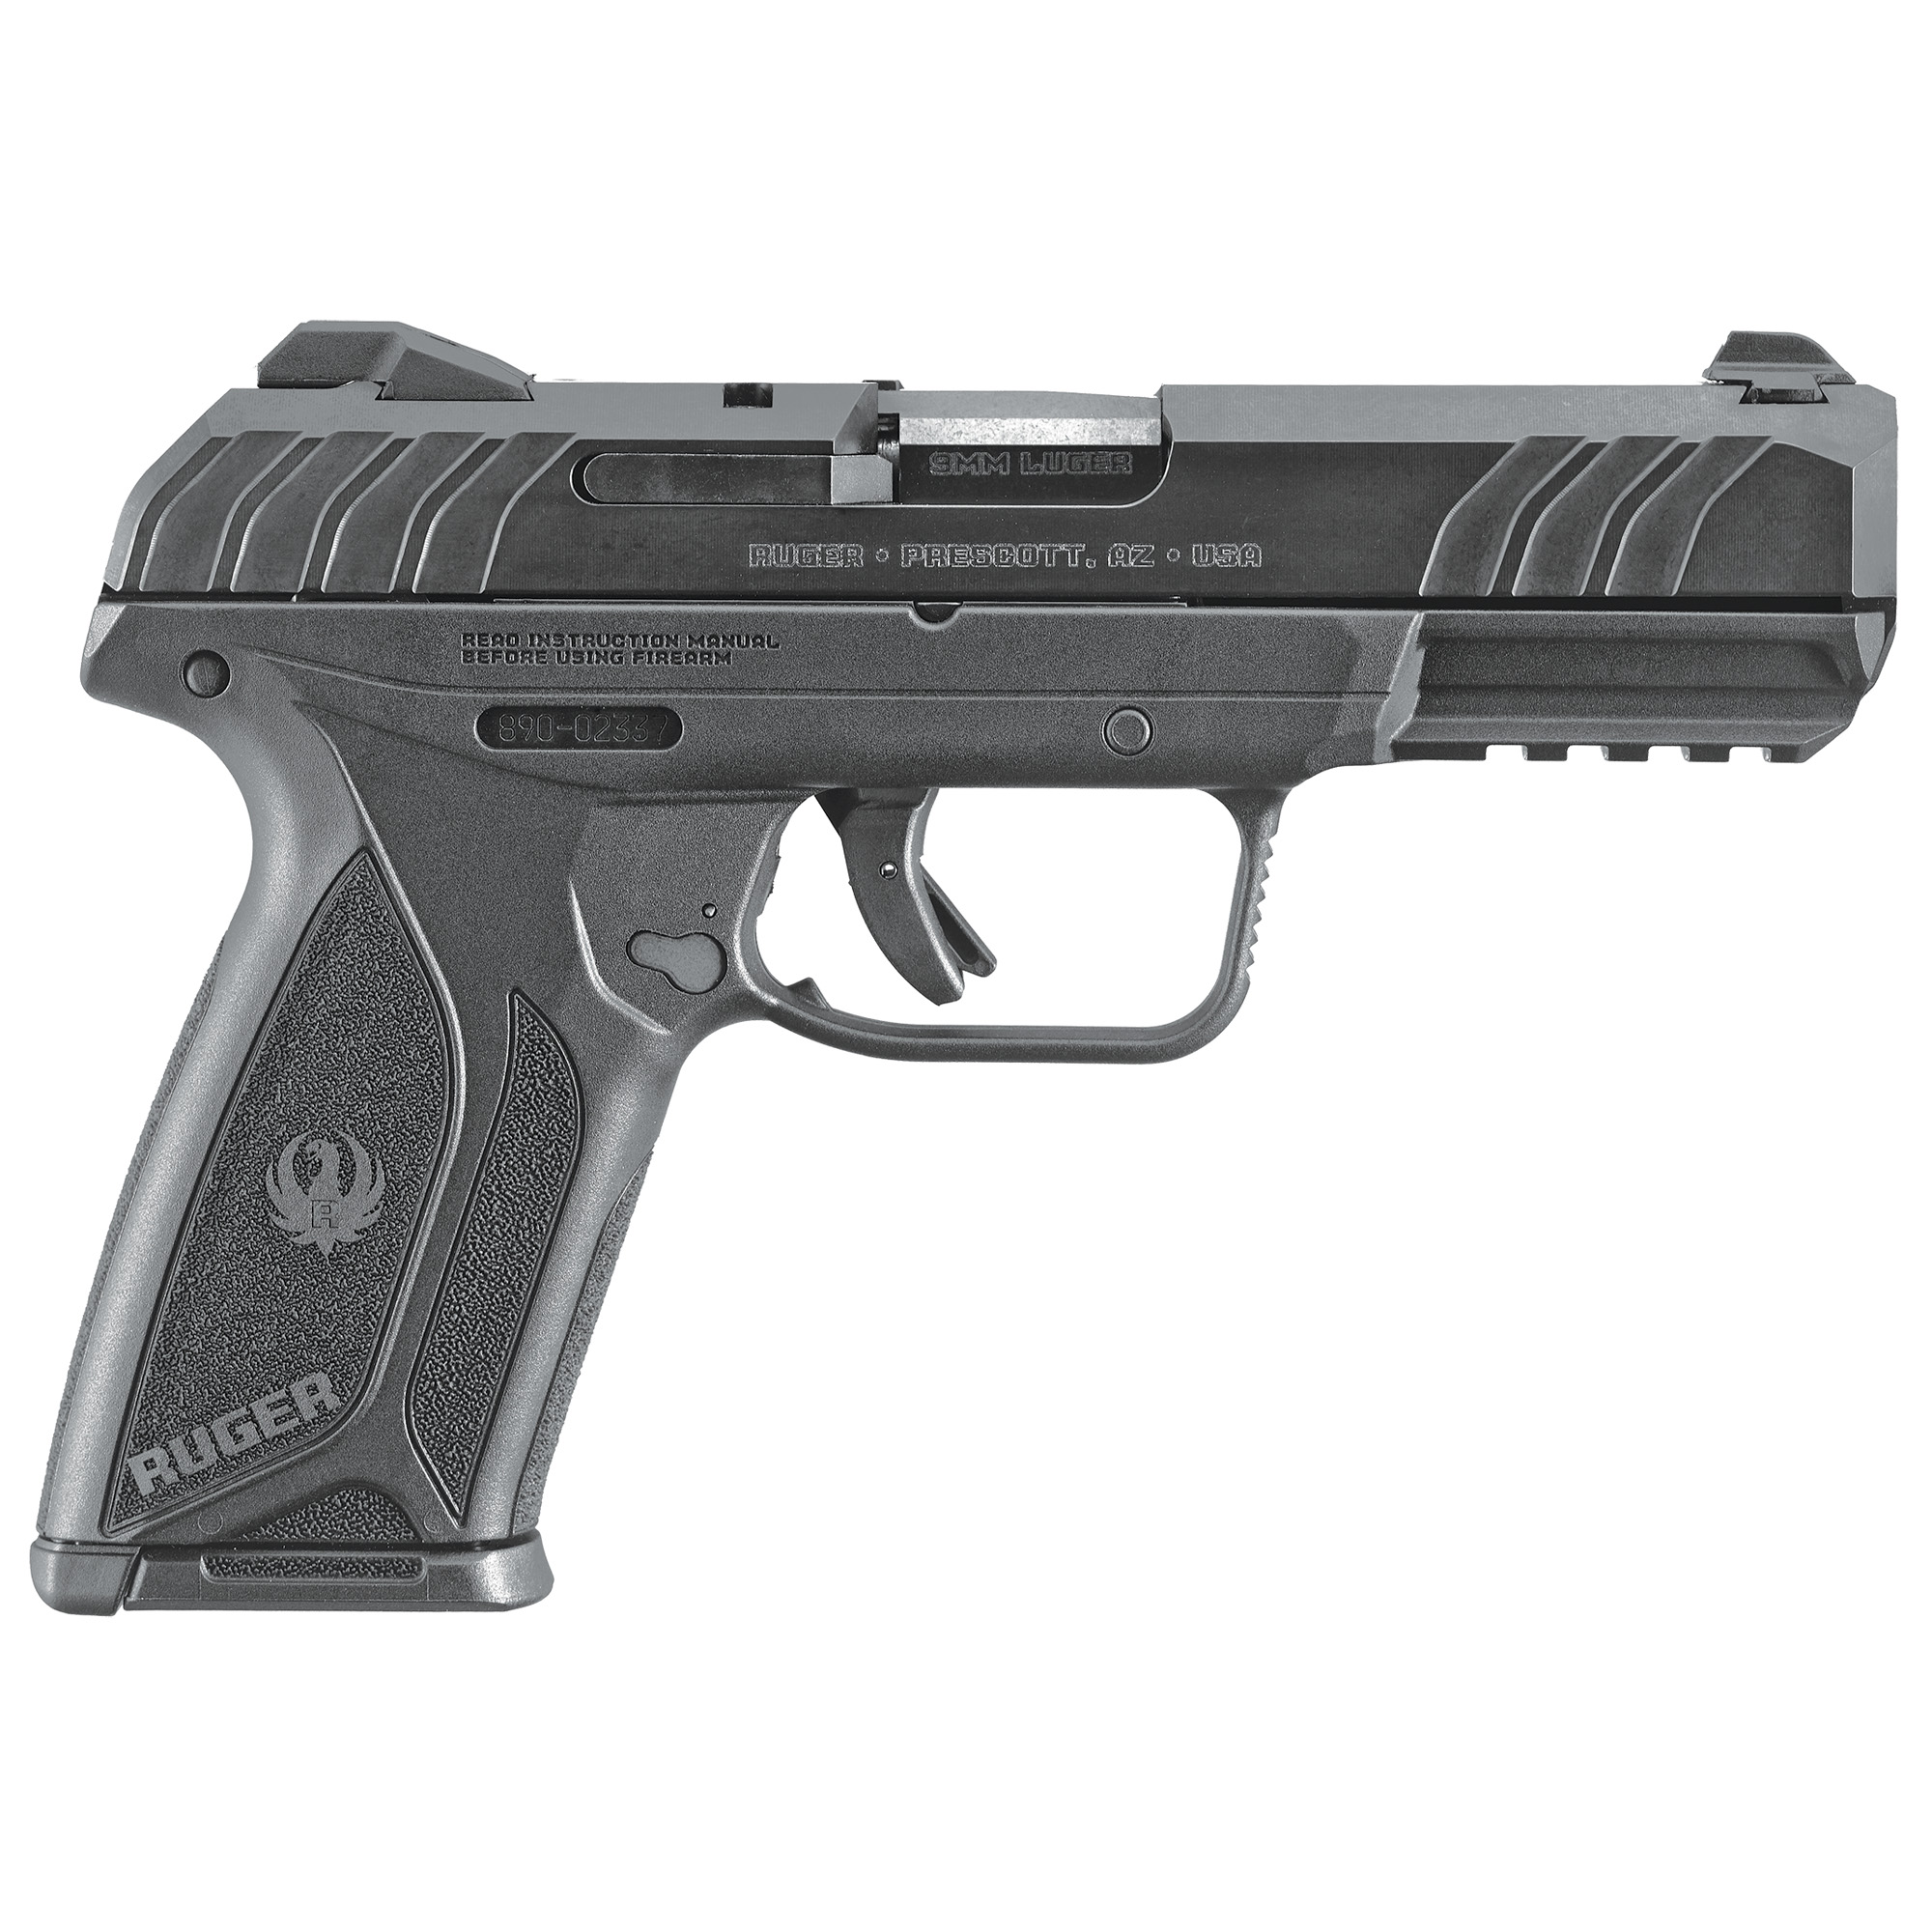 Ruger, Security-9, Double Action, Semi-automatic, Polymer Frame Pistol, Full Size, 9MM, 4" Barrel, Blued Finish, 3 Dot Drift-Adjustable Sights, Manual Safety and Integrated Trigger Safety, 15 Rounds, 2 Magazines, Right Hand